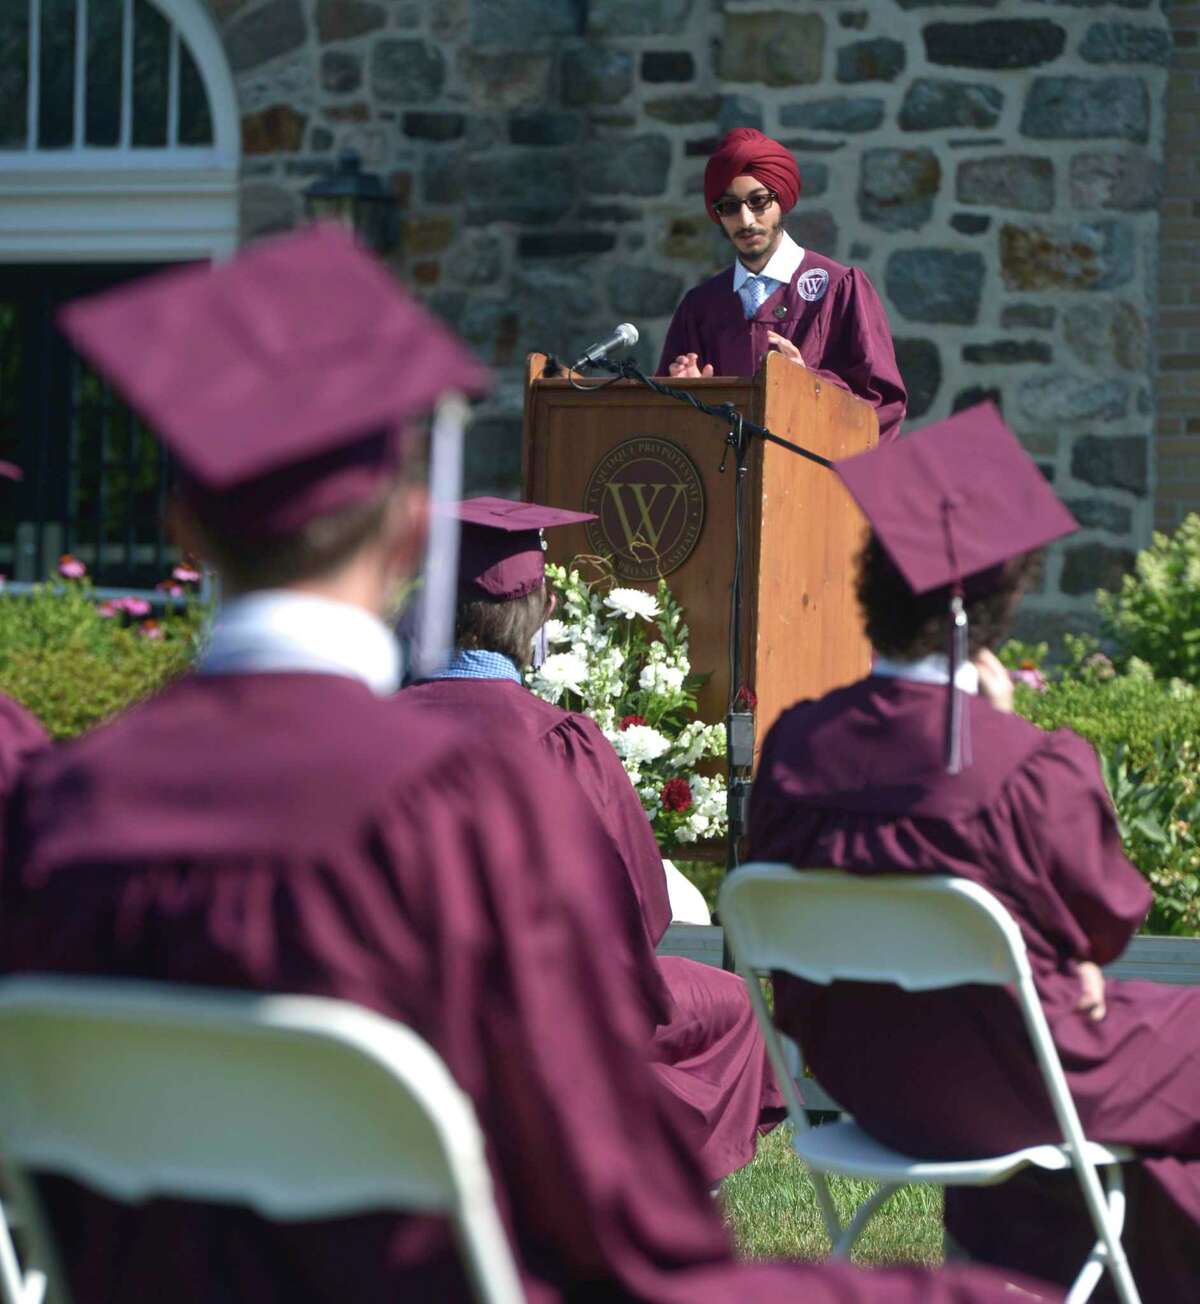 Sartaj Singh, class orator, gives his address during the Wooster School 2020 Commencement Exercises on Monday on the school campus in Danbury. Below, a grad laughs during Commencement.